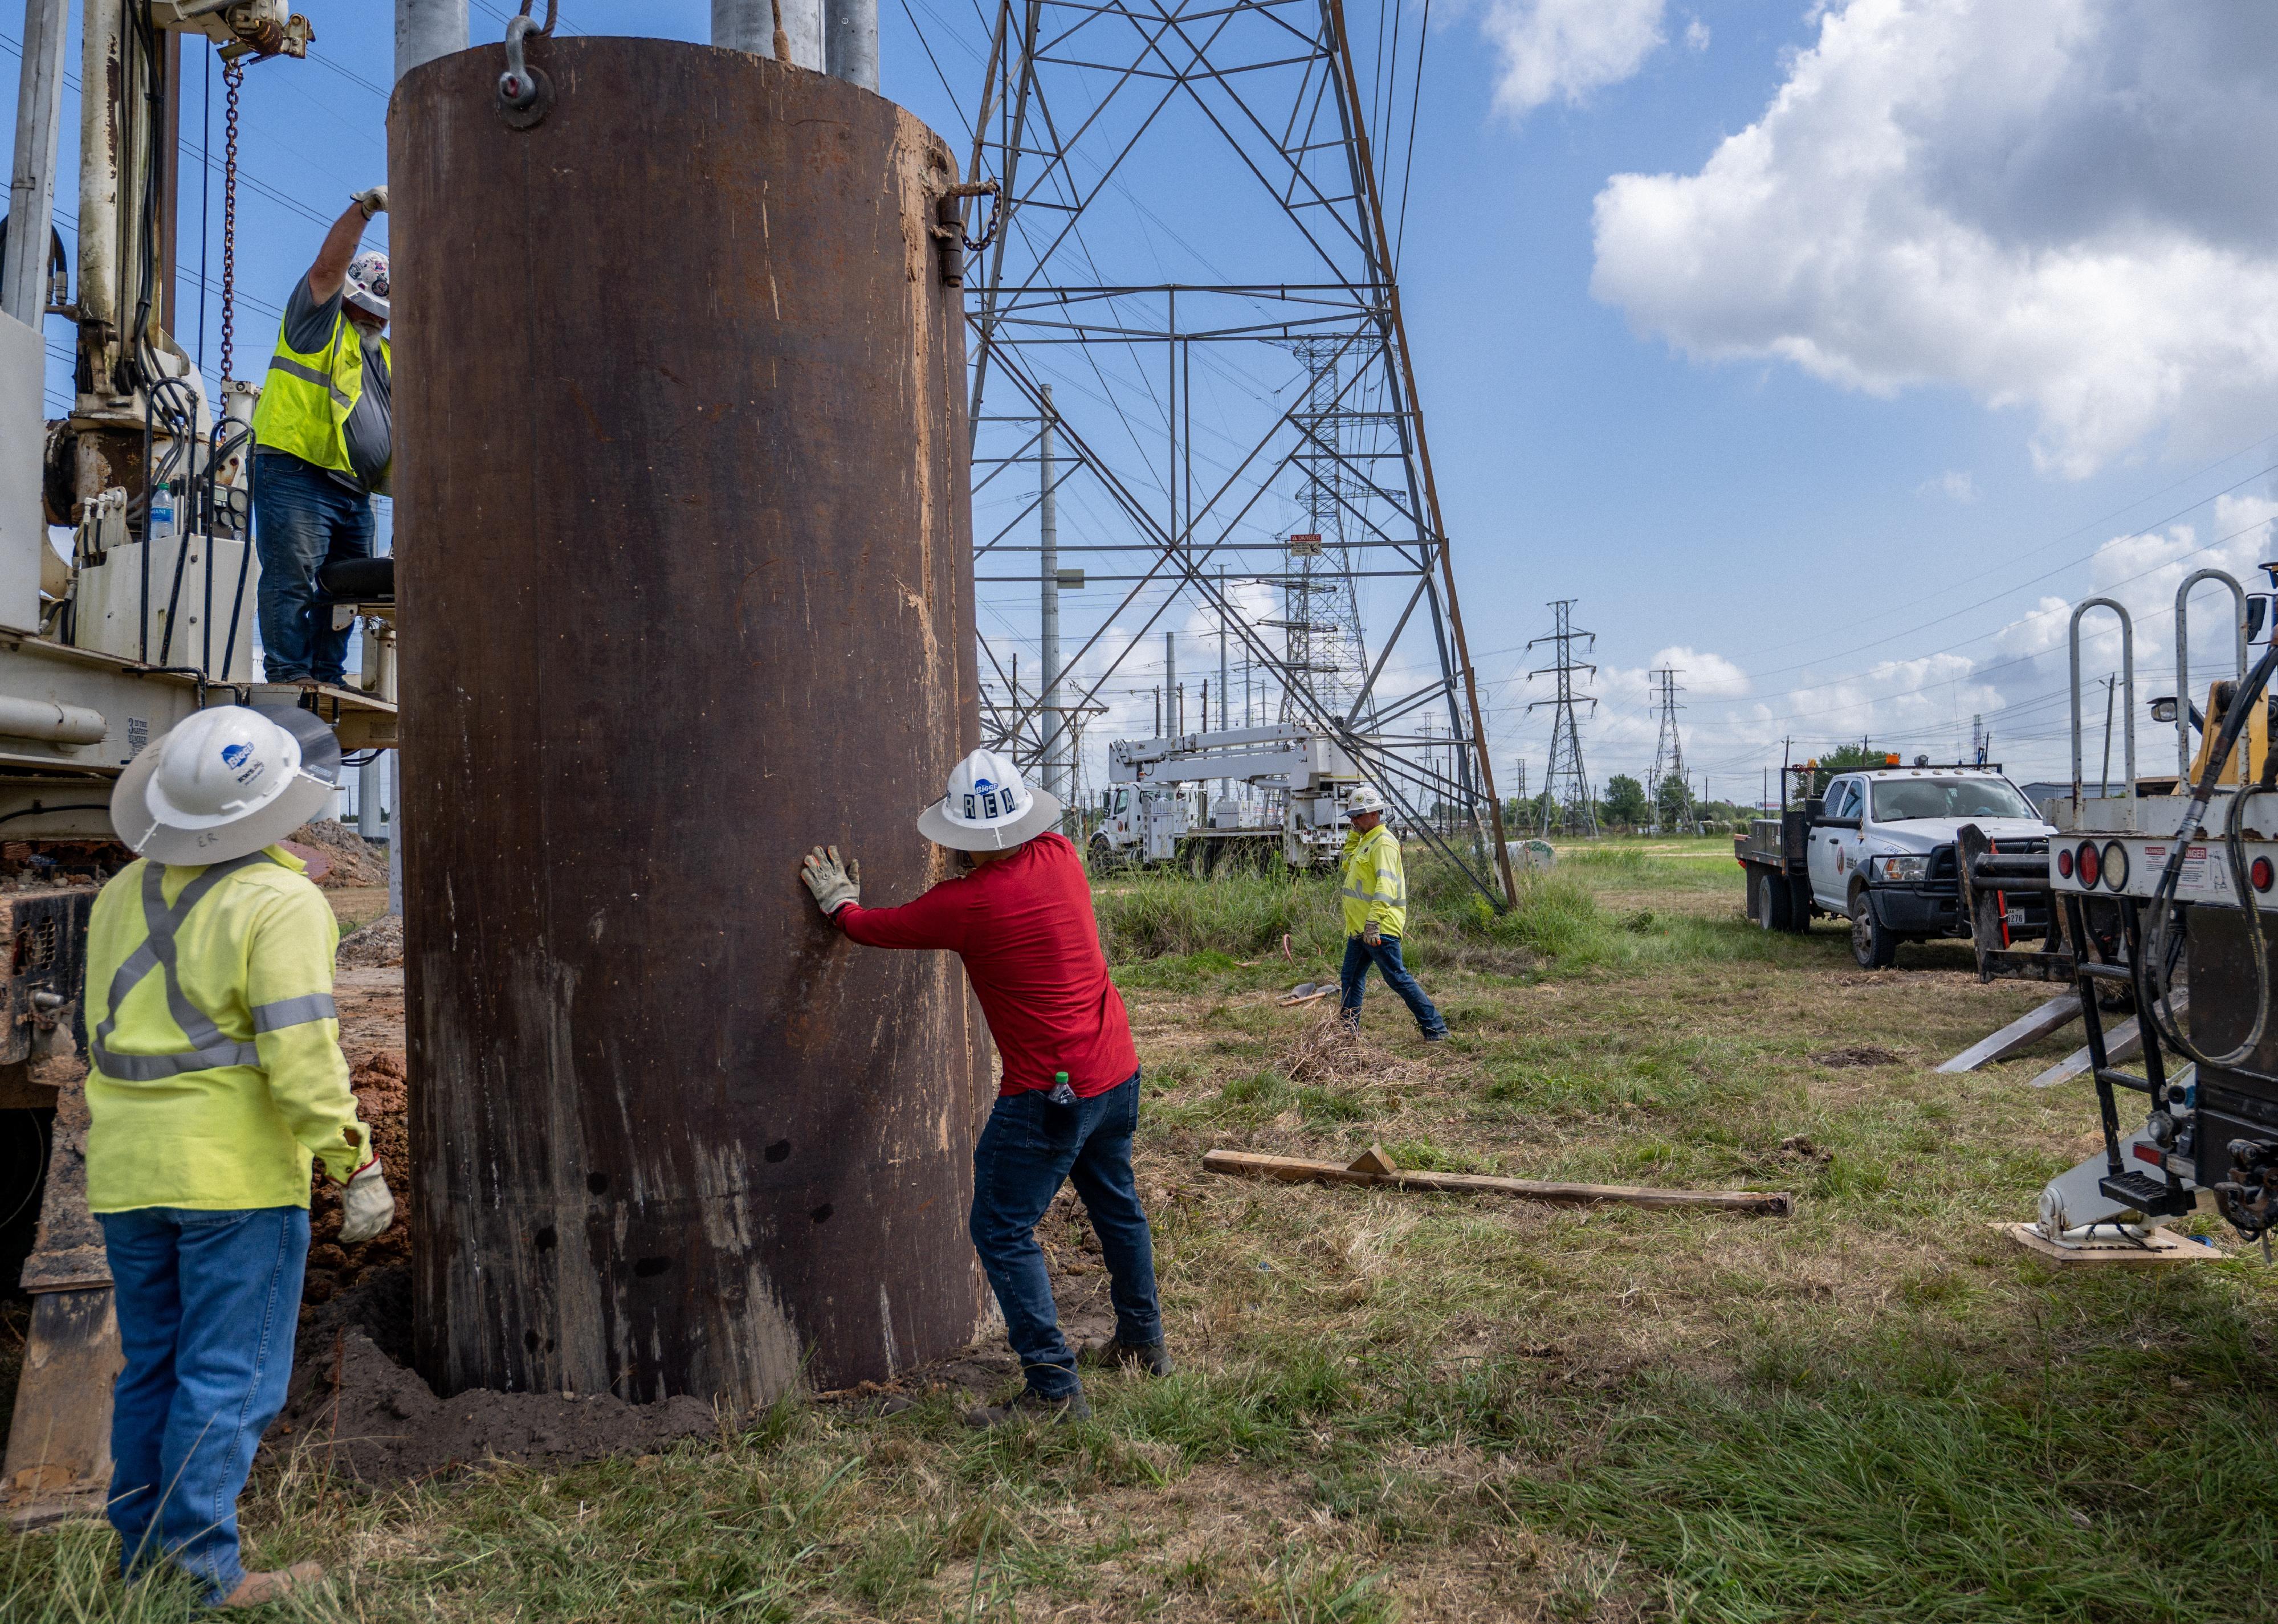 Service technicians work to install the foundation for a transmission tower.